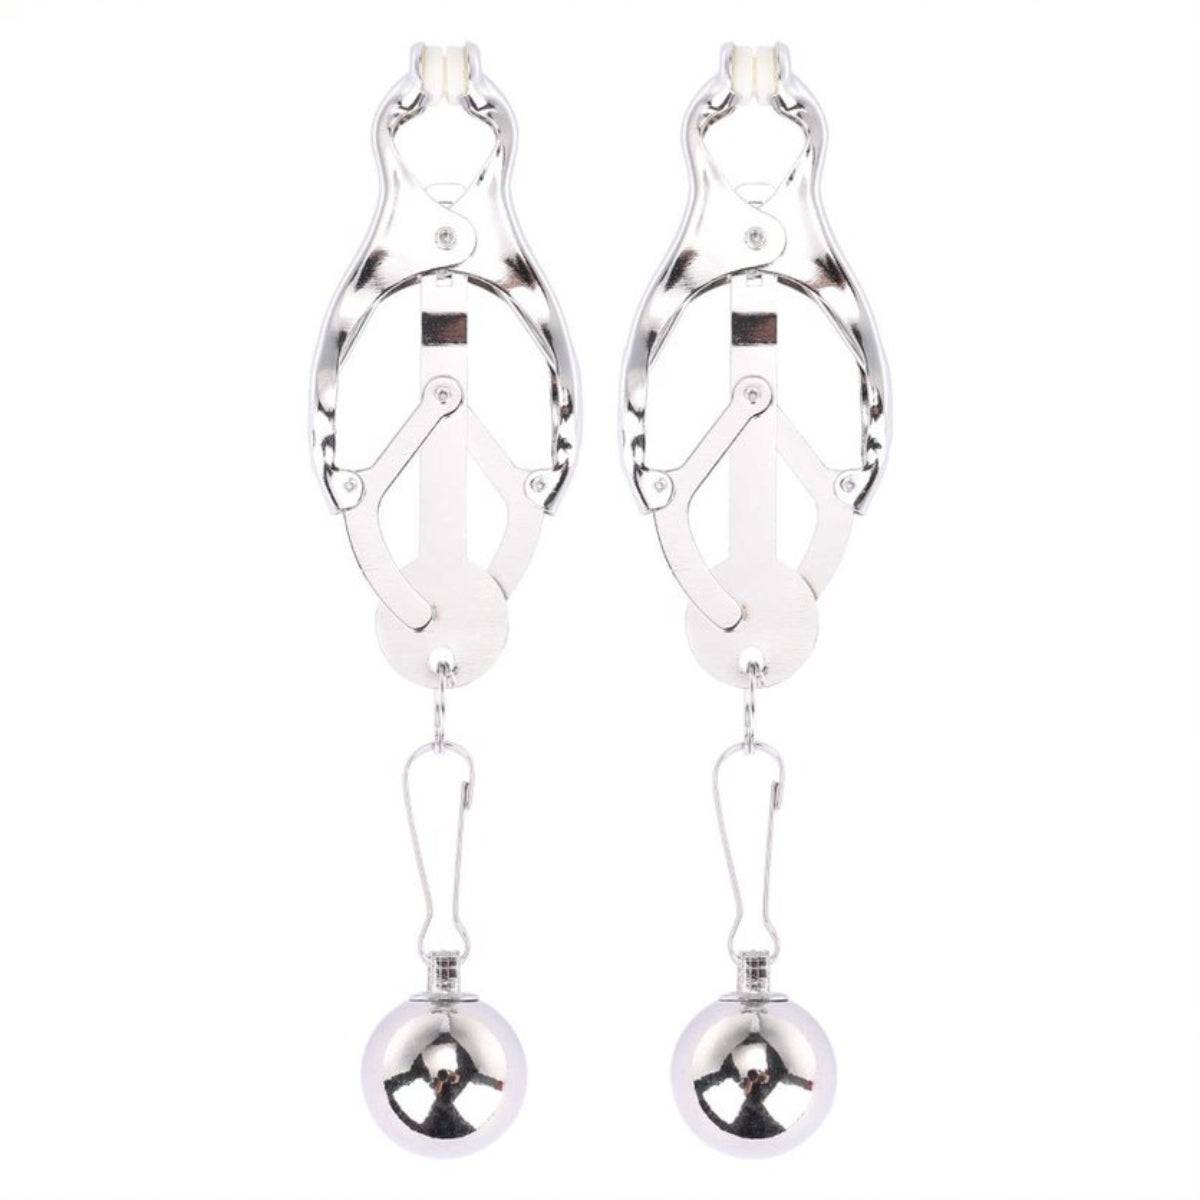 Front View Product - Me You Us Clover Nipple Clamps Silver - Simply Pleasure